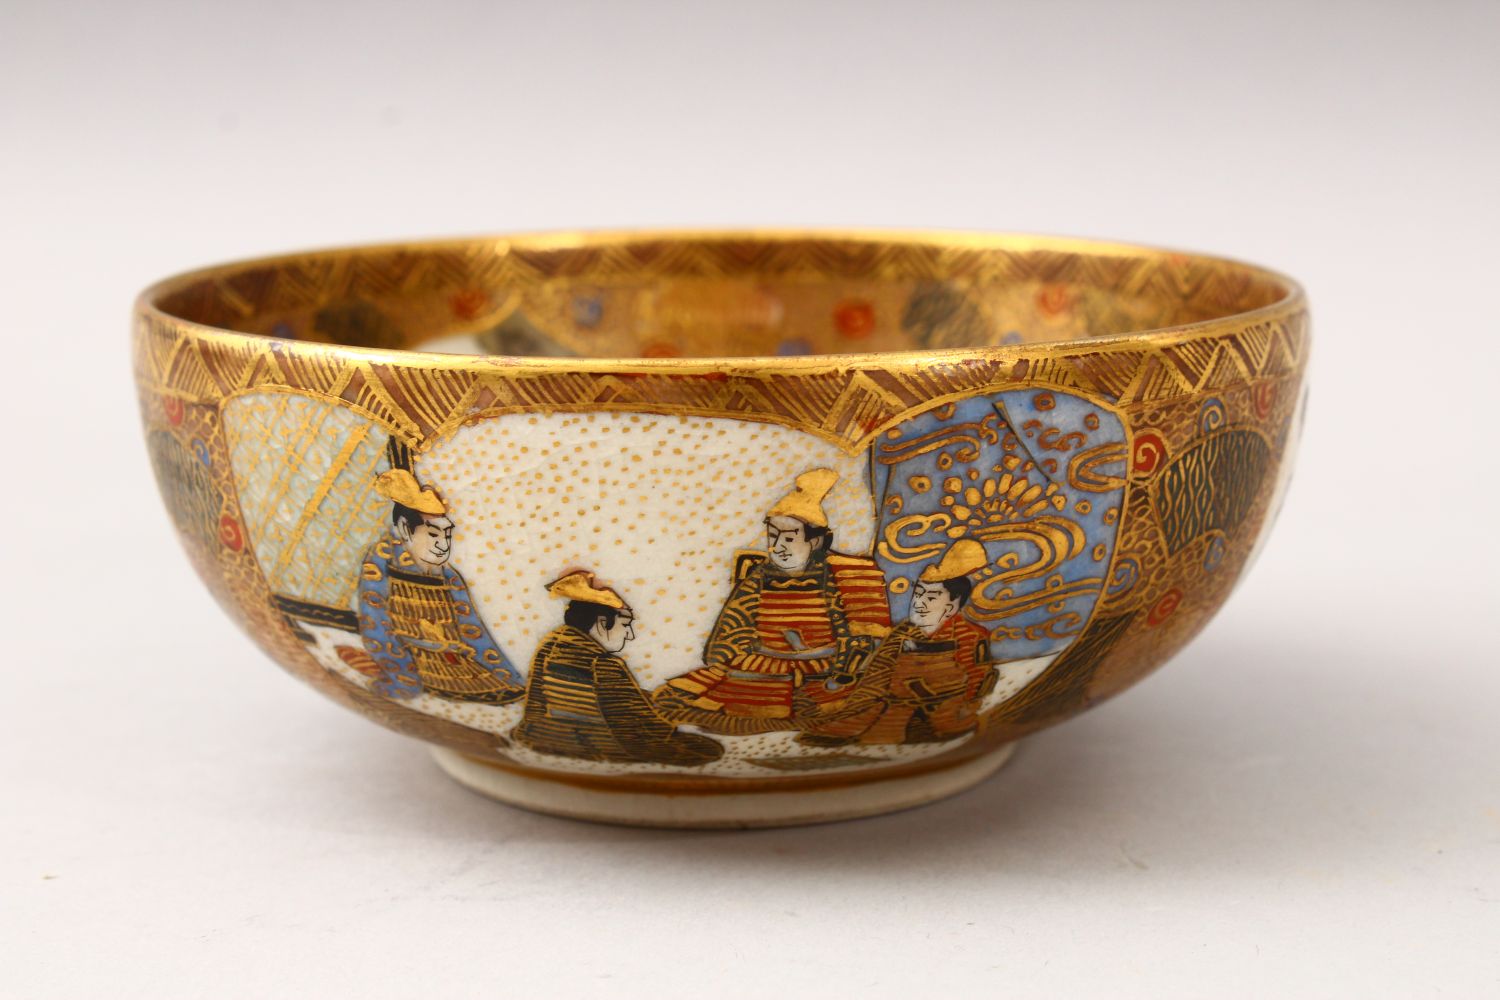 A JAPANESE MEIJI PERIOD SATSUMA IMMORTAL BOWL, the interior of the bowl decorated with scenes of - Image 4 of 7